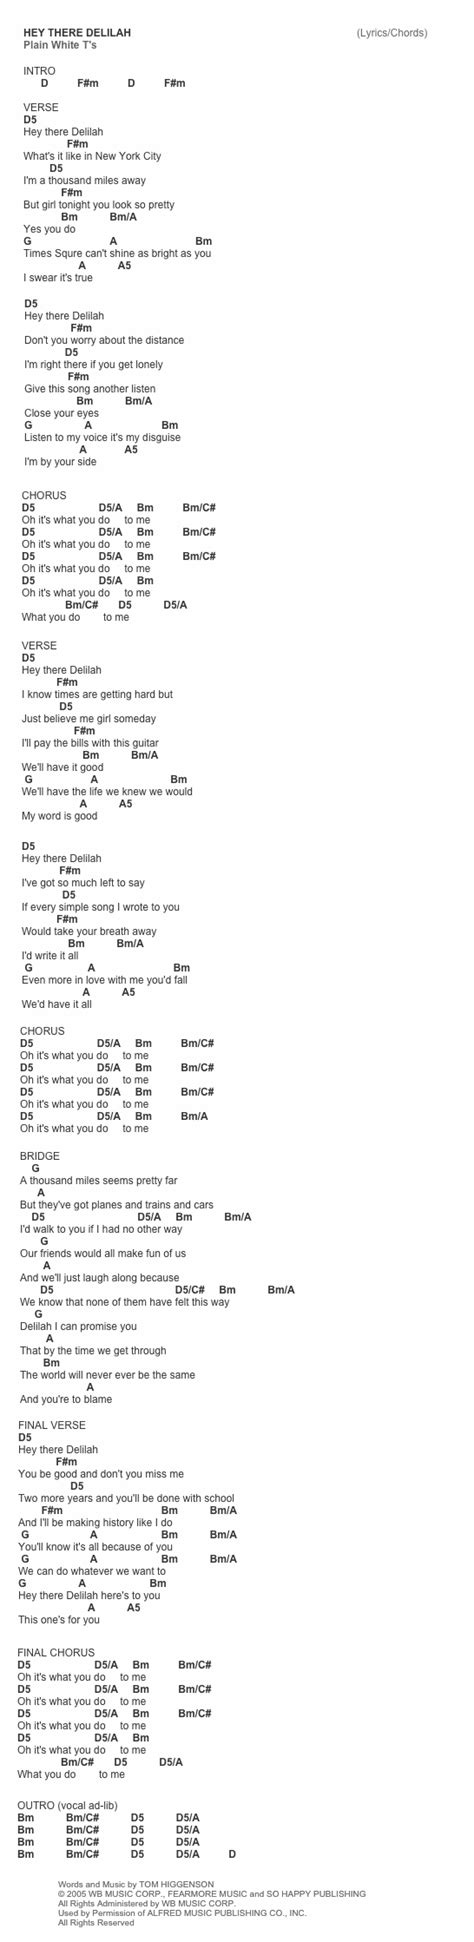 Hey there, delilah, i know times are getting hard. Hey There Delilah by Plain White T's example 8 cheat sheet ...